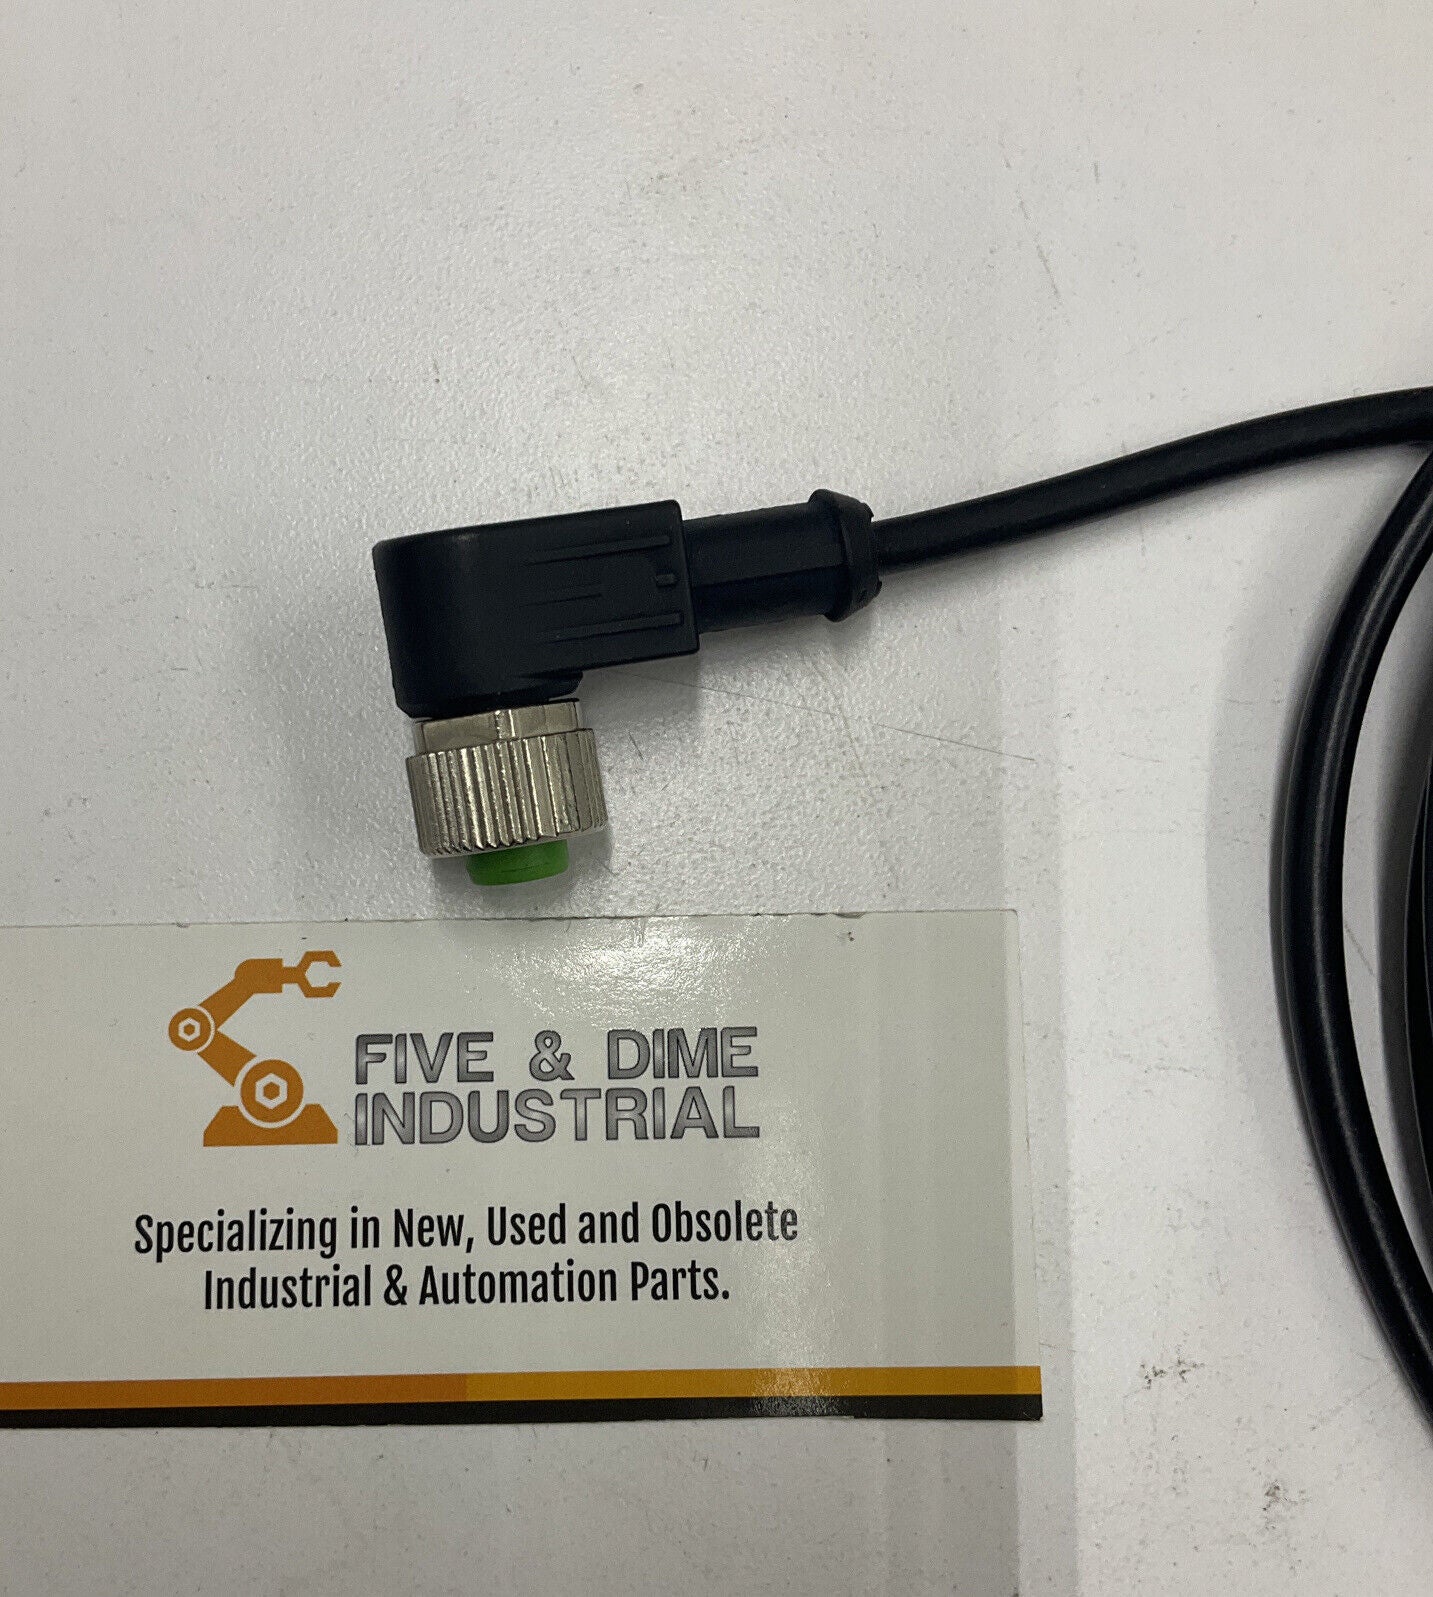 Automation Direct CD12M-0B-050-C1 M12 Connection Cable (YE169) - 0